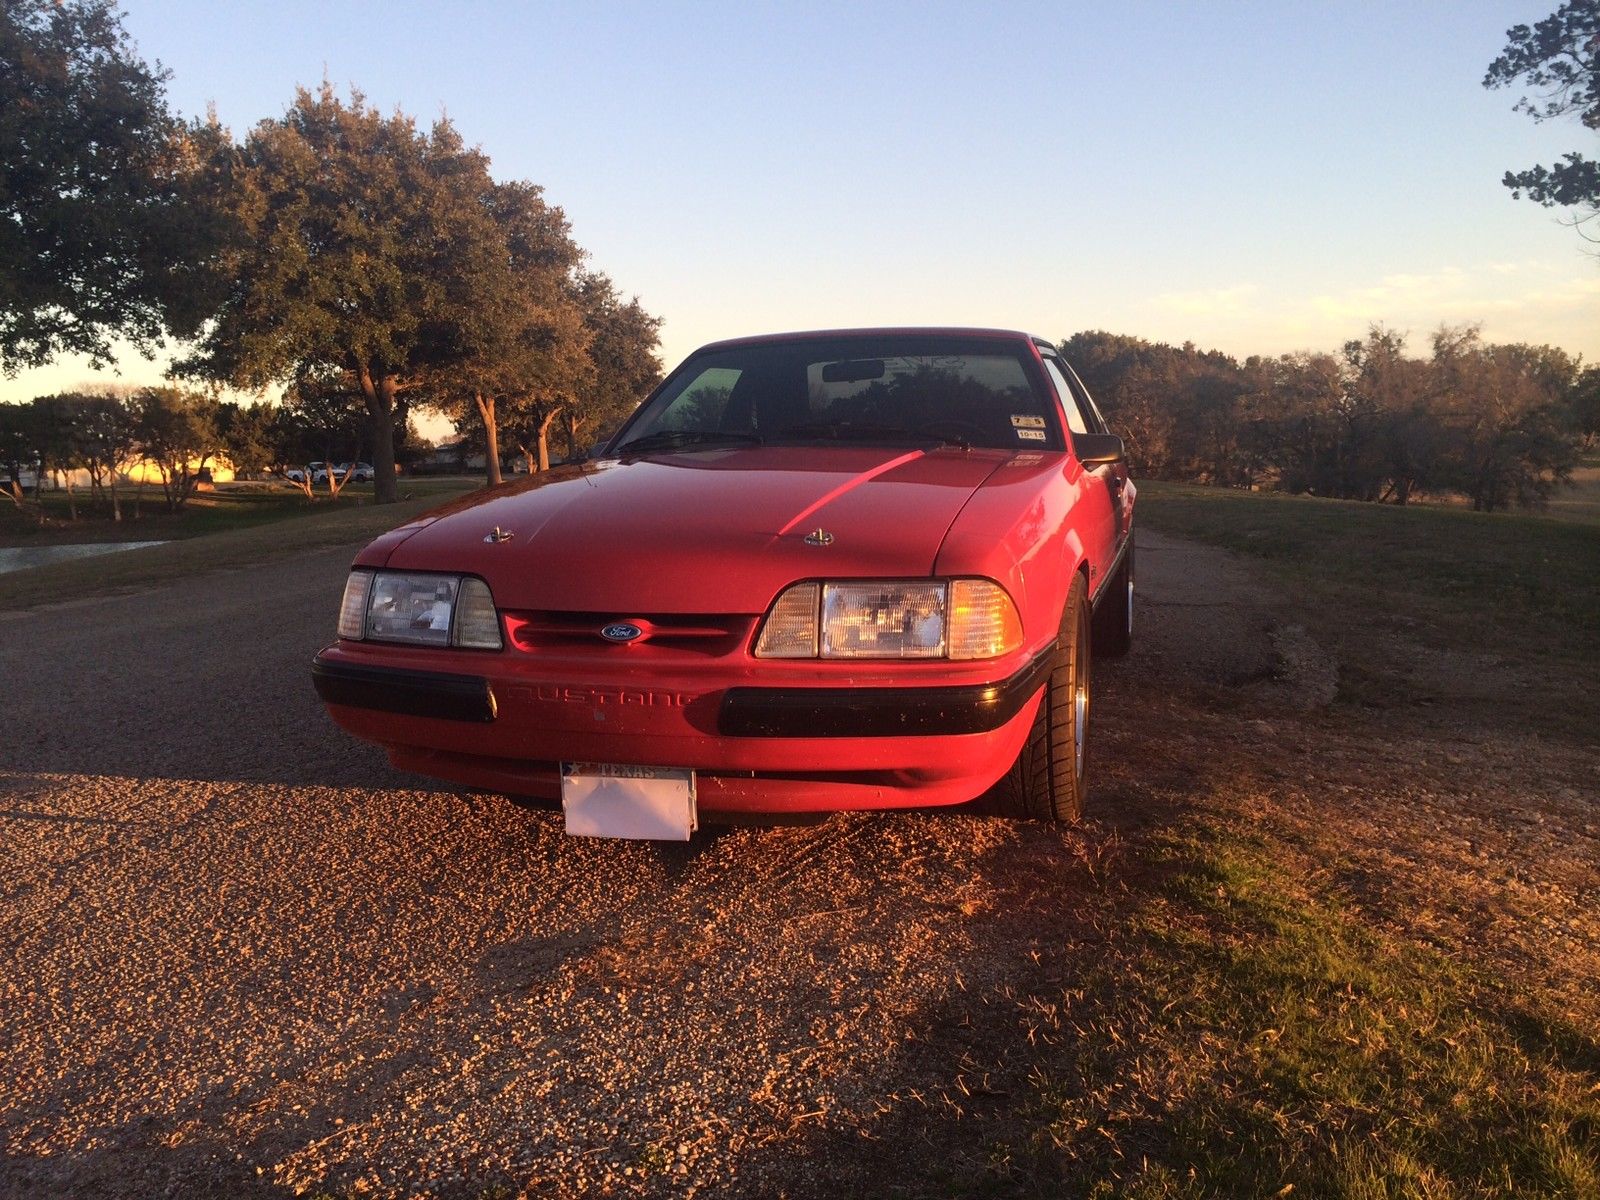 1991 ford mustang LX, 5.0, 5 speed,supercharged - Classic Ford Mustang